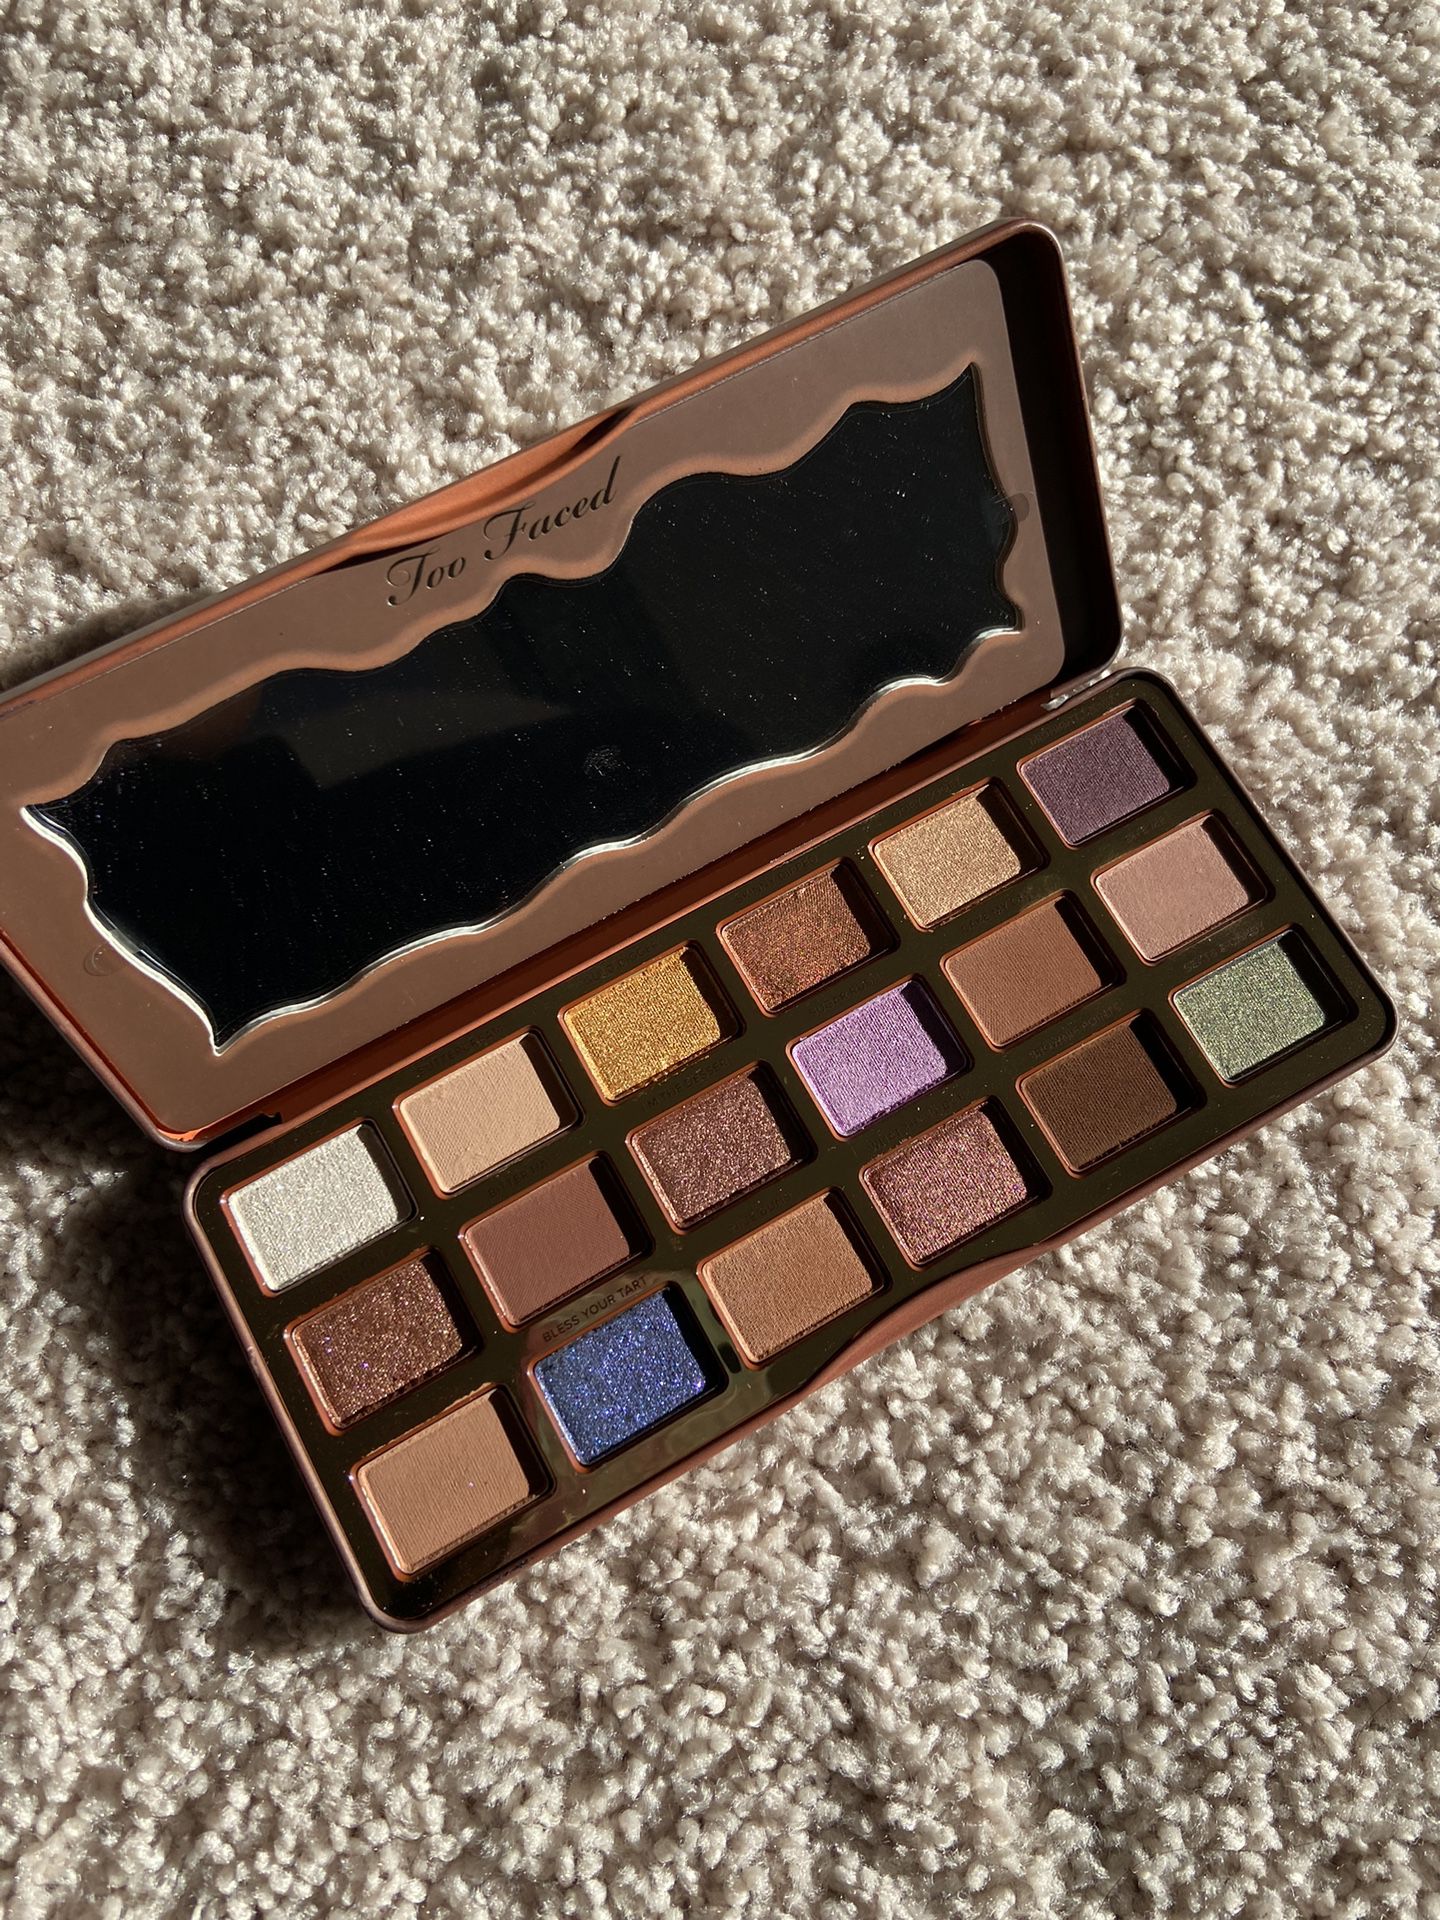 Too faced better than chocolate palette